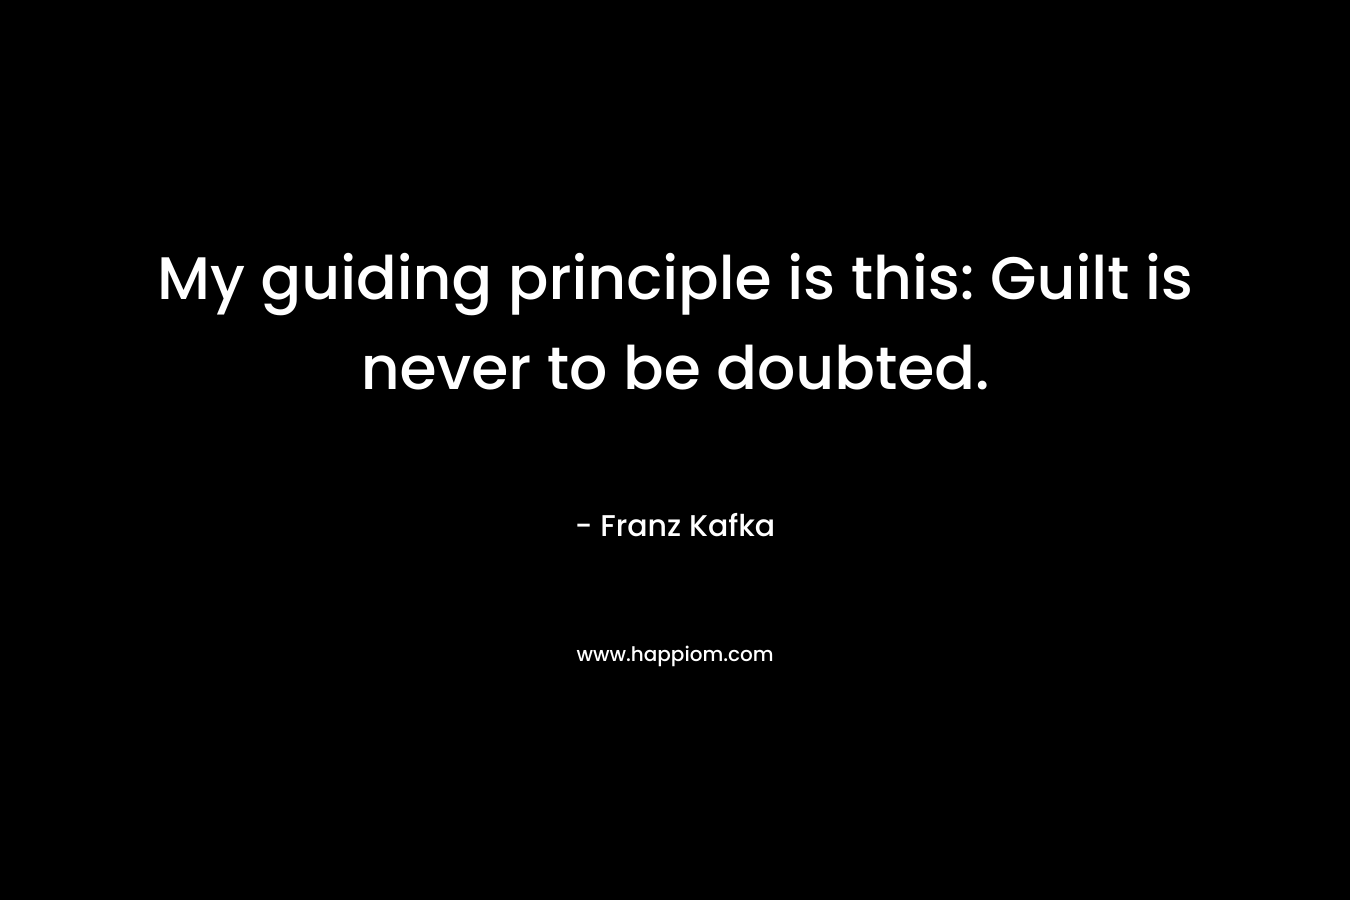 My guiding principle is this: Guilt is never to be doubted. – Franz Kafka